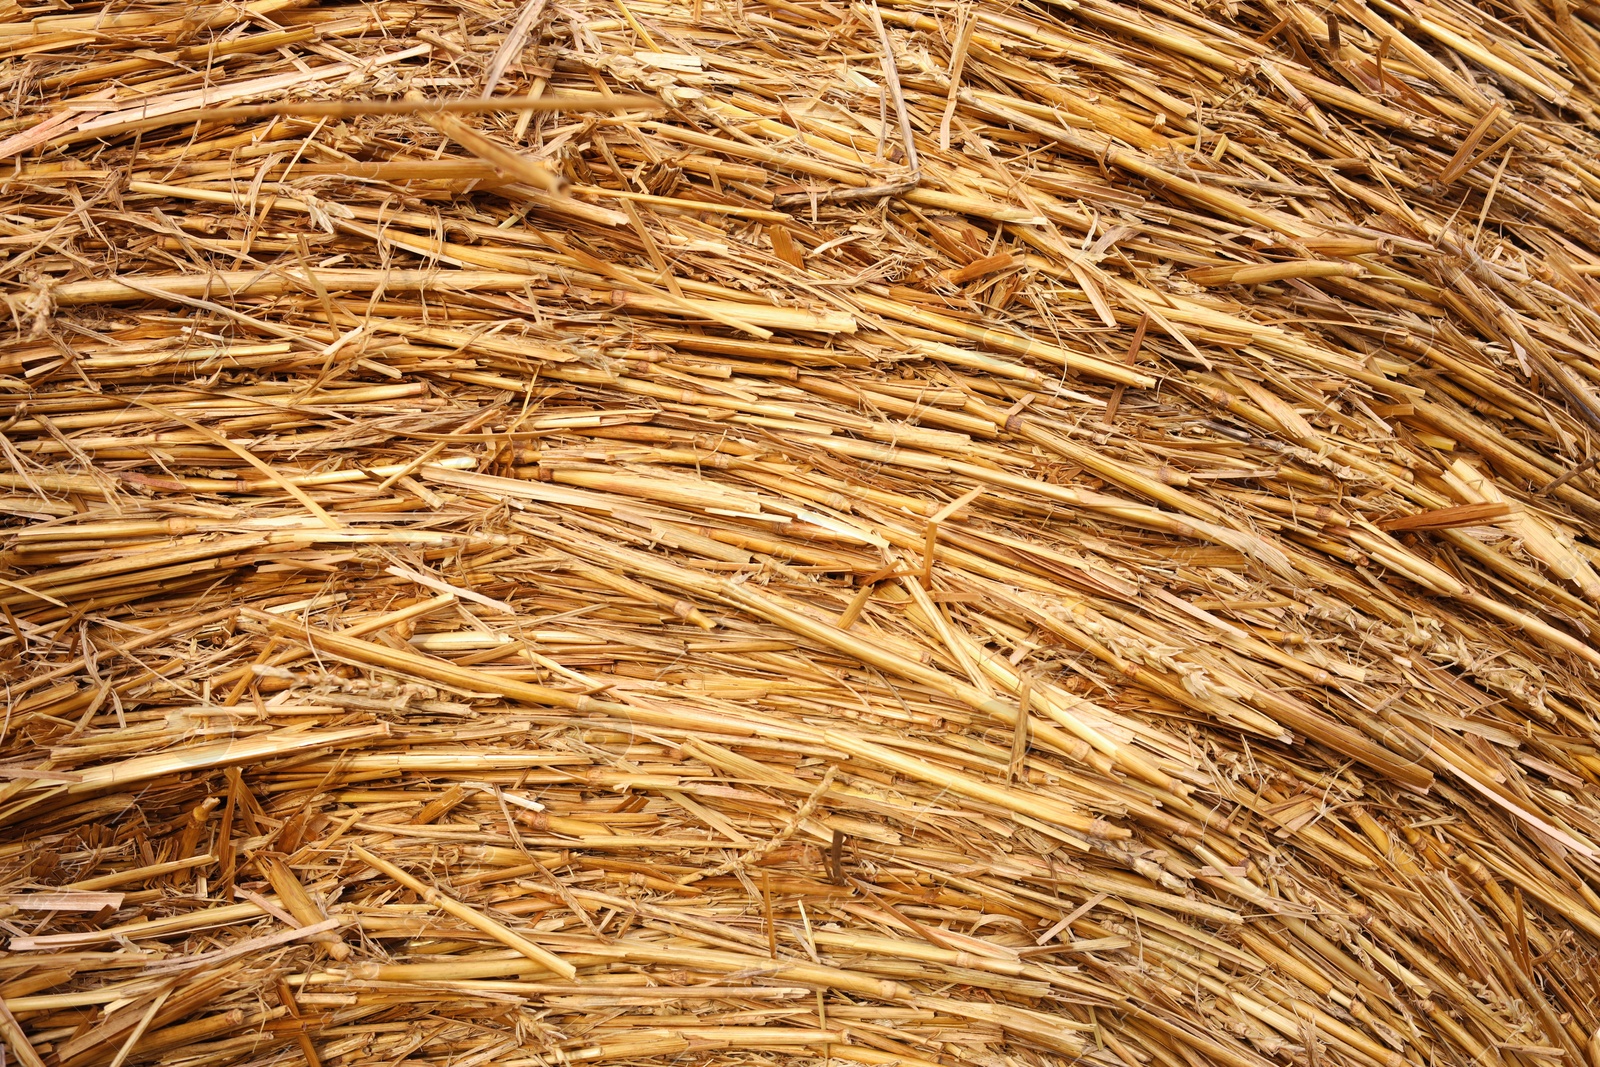 Photo of Hay bale roll as background, closeup view